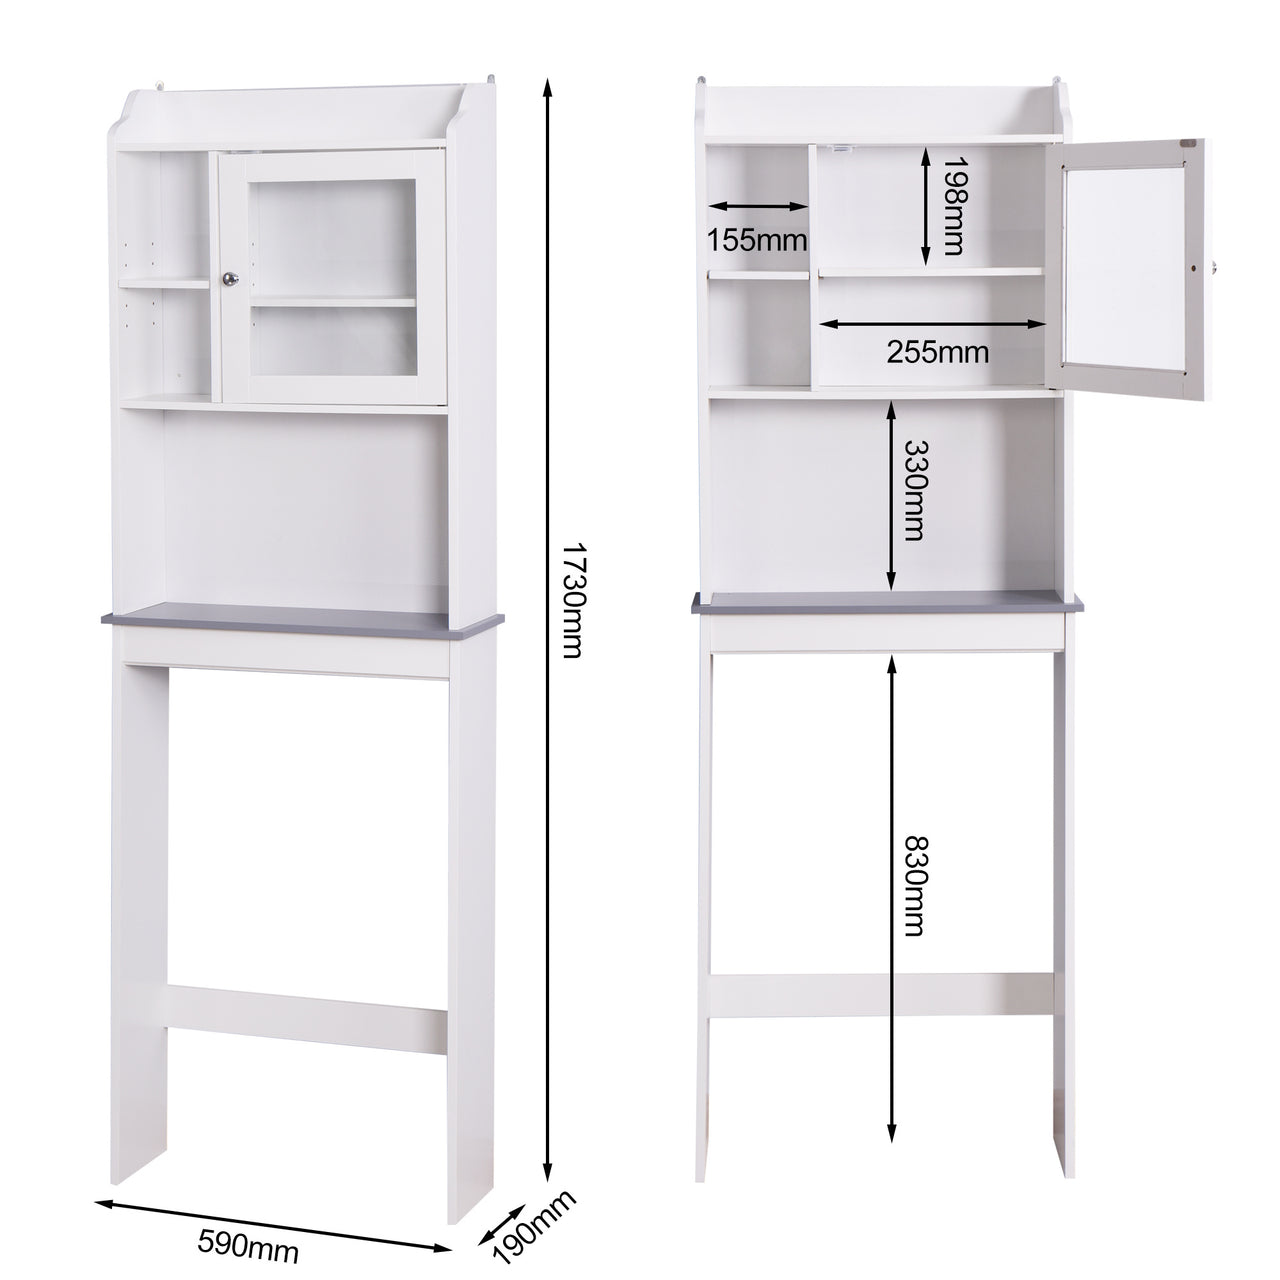 Modern Over The Toilet Space Saver Organization Wood Storage Cabinet for Home, Bathroom -White - NosCiBe